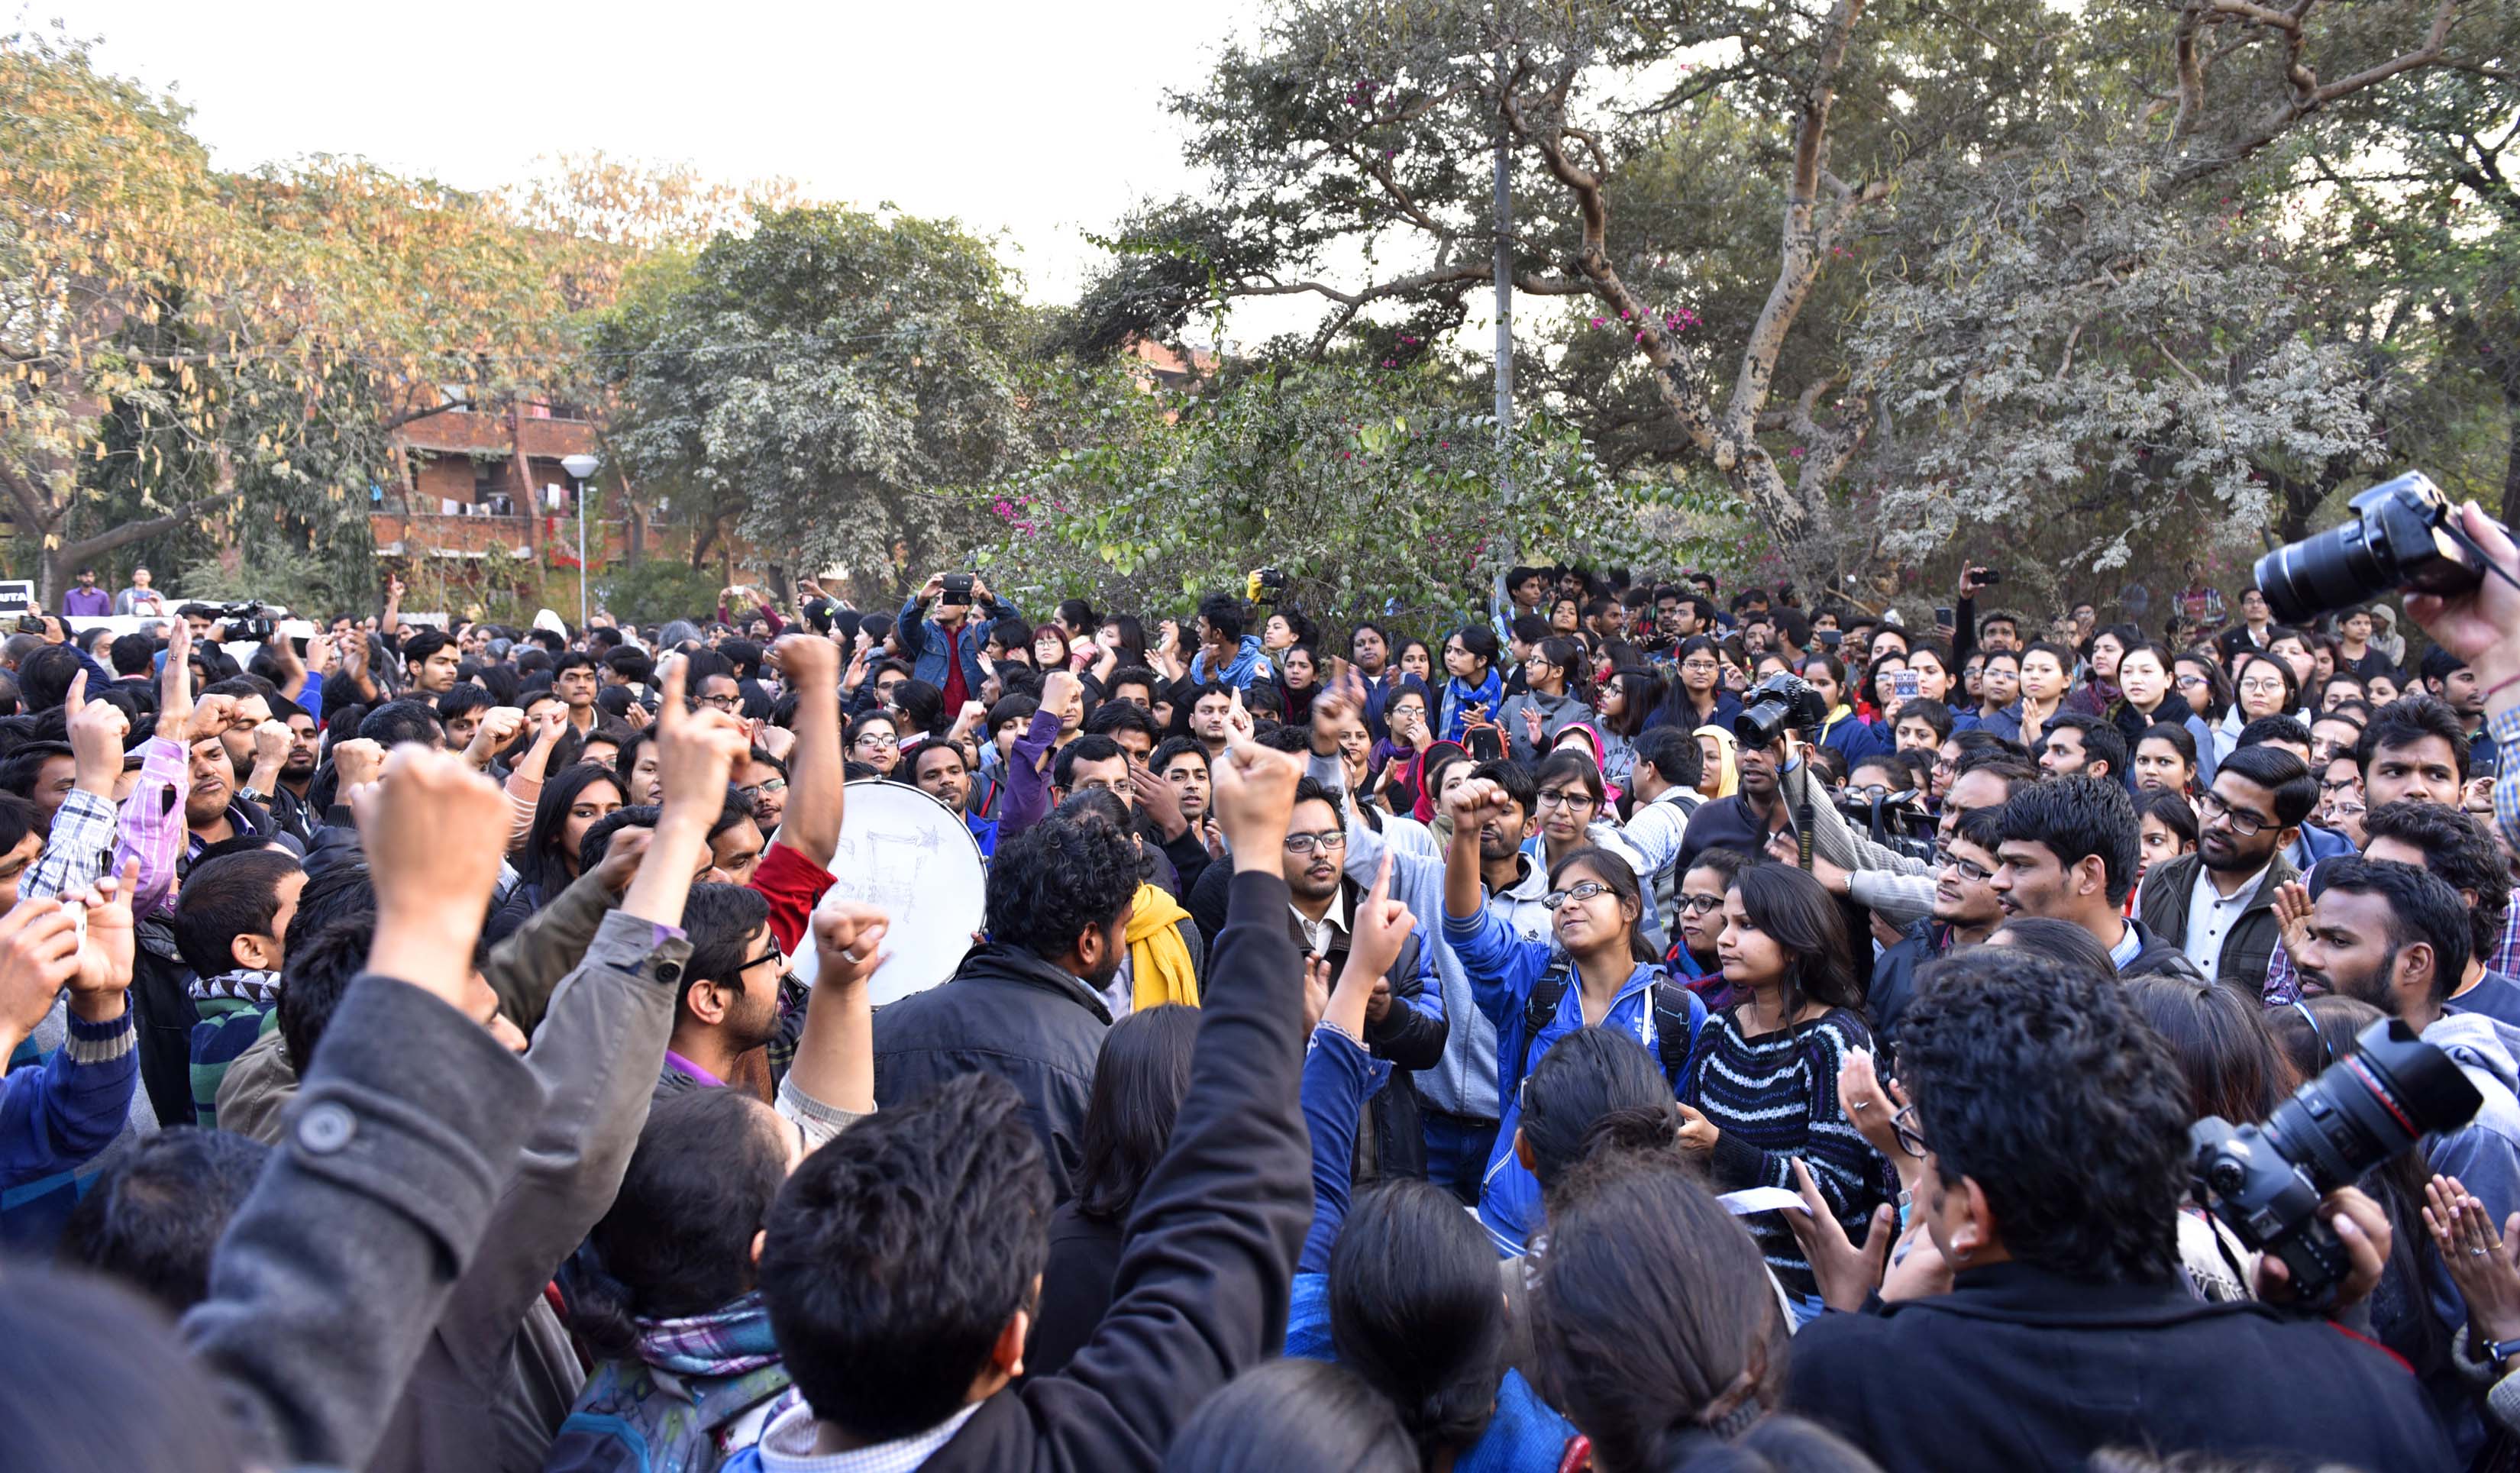 Jawaharlal Nehru University teachers and students form a human chain inside the campus in New Delhi on Feb. 14, 2016, in protest against the arrest of JNU students'-union president Kanhaiya Kumar, who was arrested on sedition charges in connection with an event organized on the campus against the hanging of Afzal Guru (Sanjeev Verma—Hindustan Times/Getty Images)